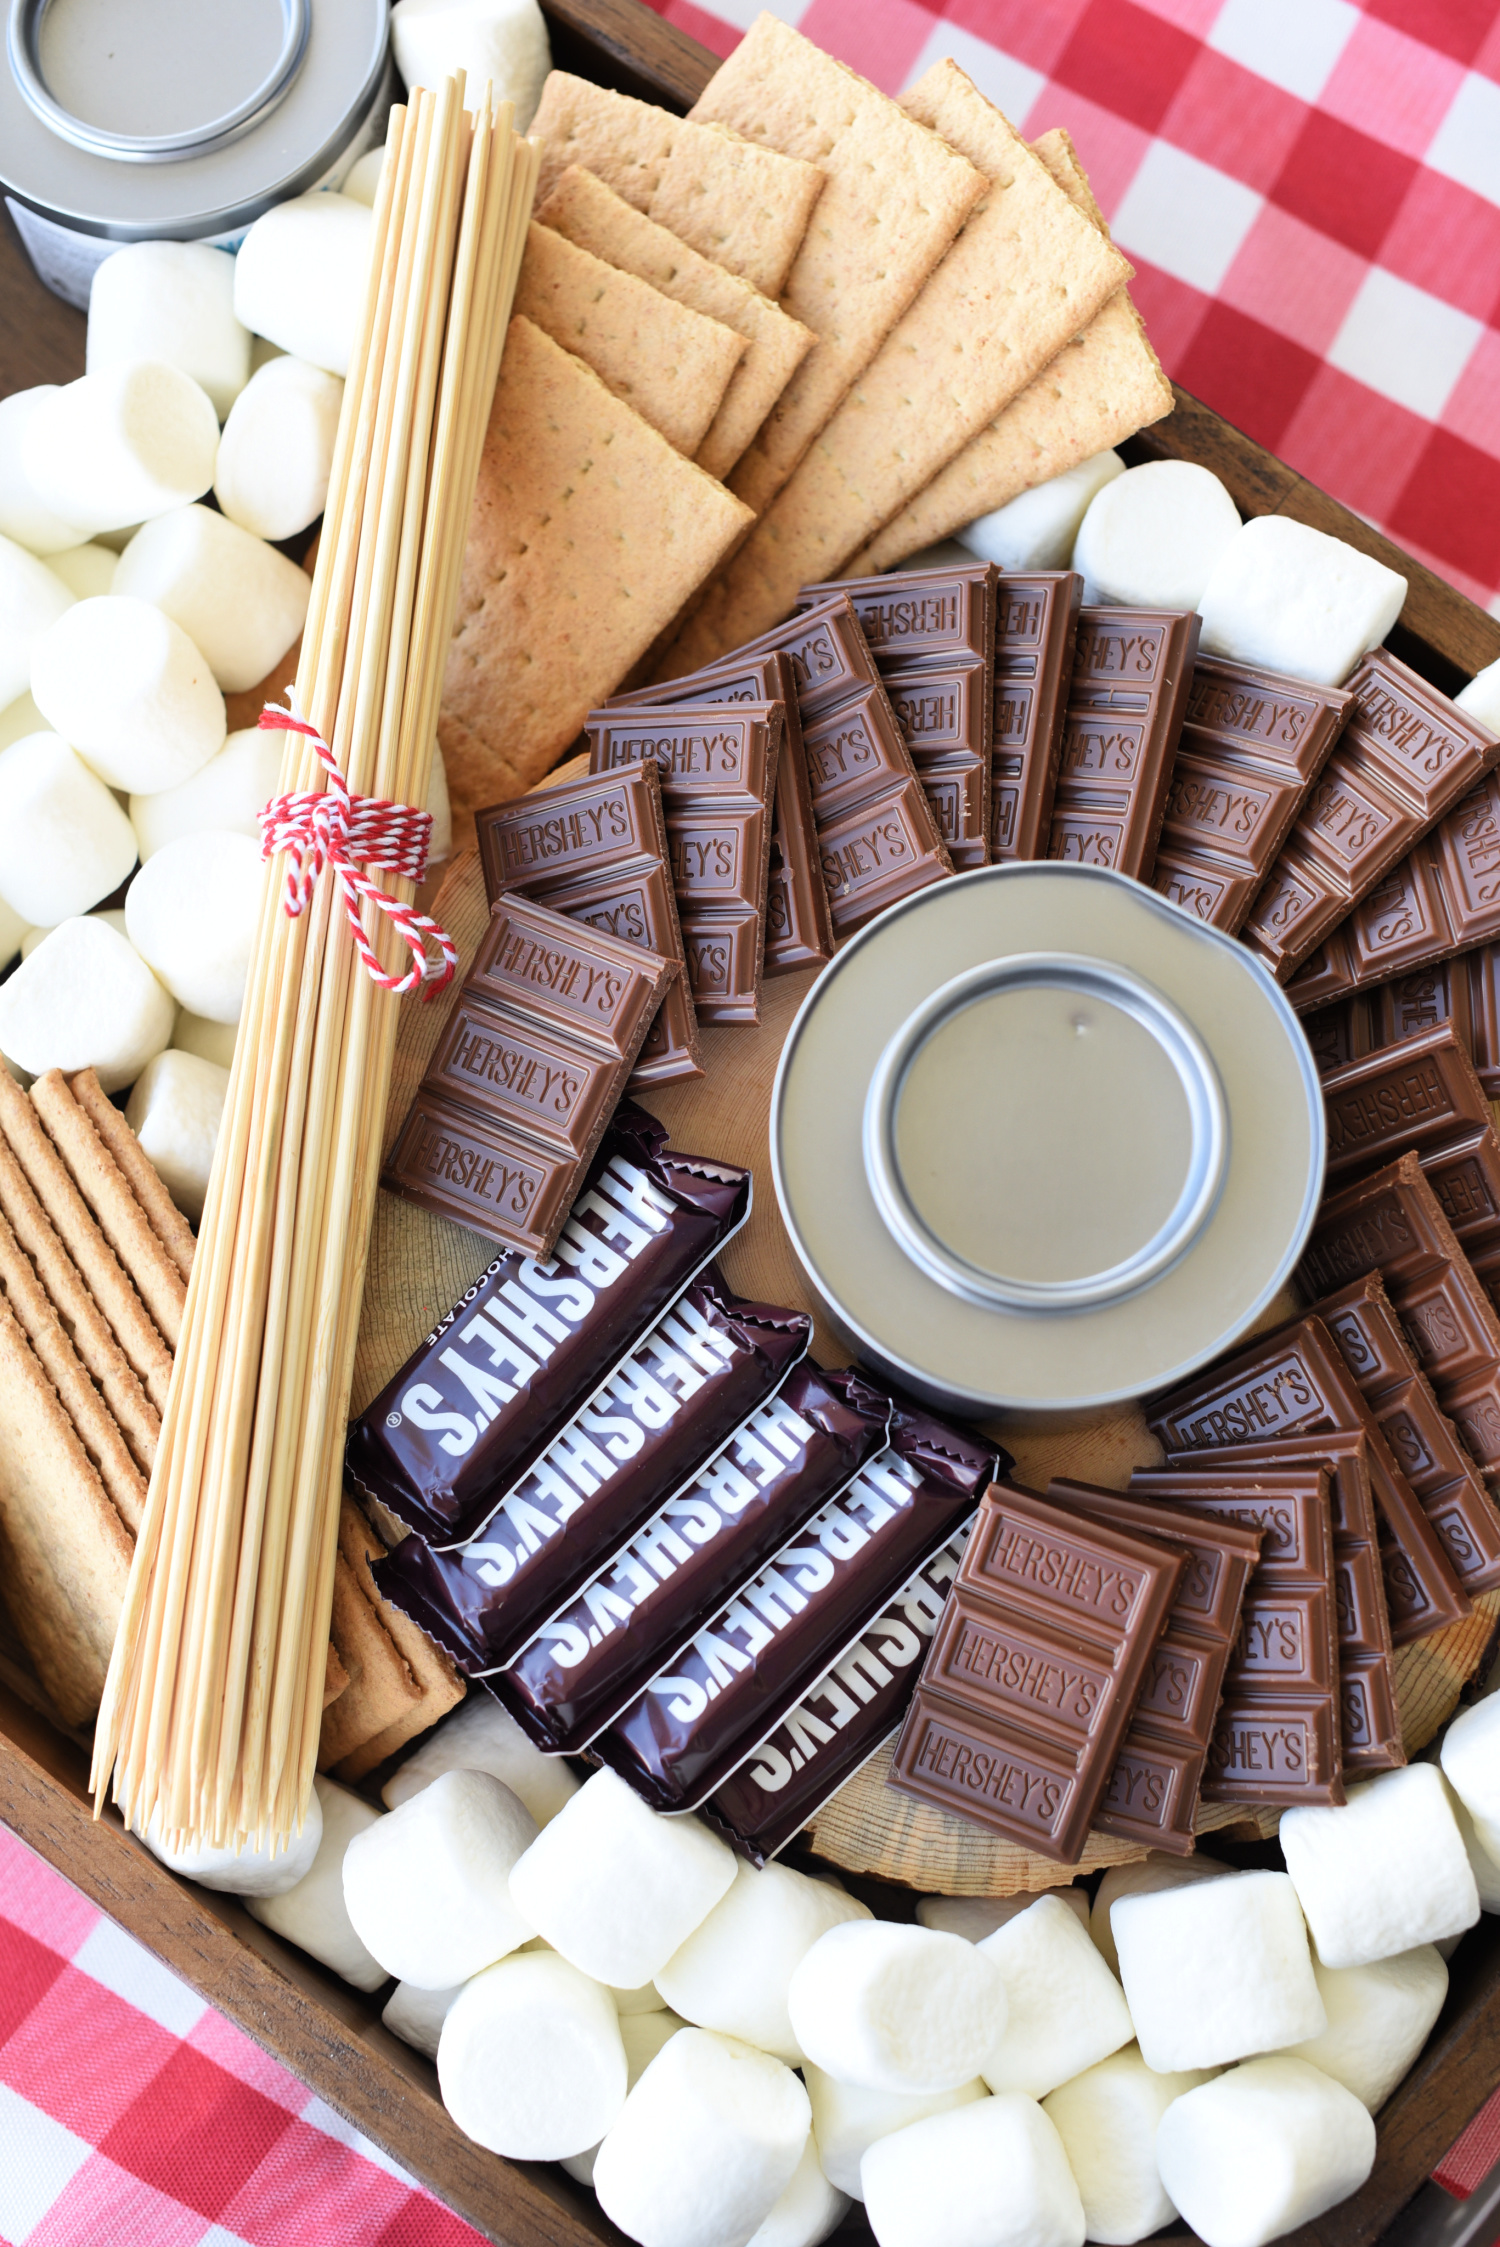 S'mores Charcuterie Board-A fun idea for outdoor entertaining this summer! Make a cute charcuterie board with marshmallows, graham crackers and chocolate, then let guests create their own s'more! #summer #smores #dessert #summerentertaining #charcuterieboard